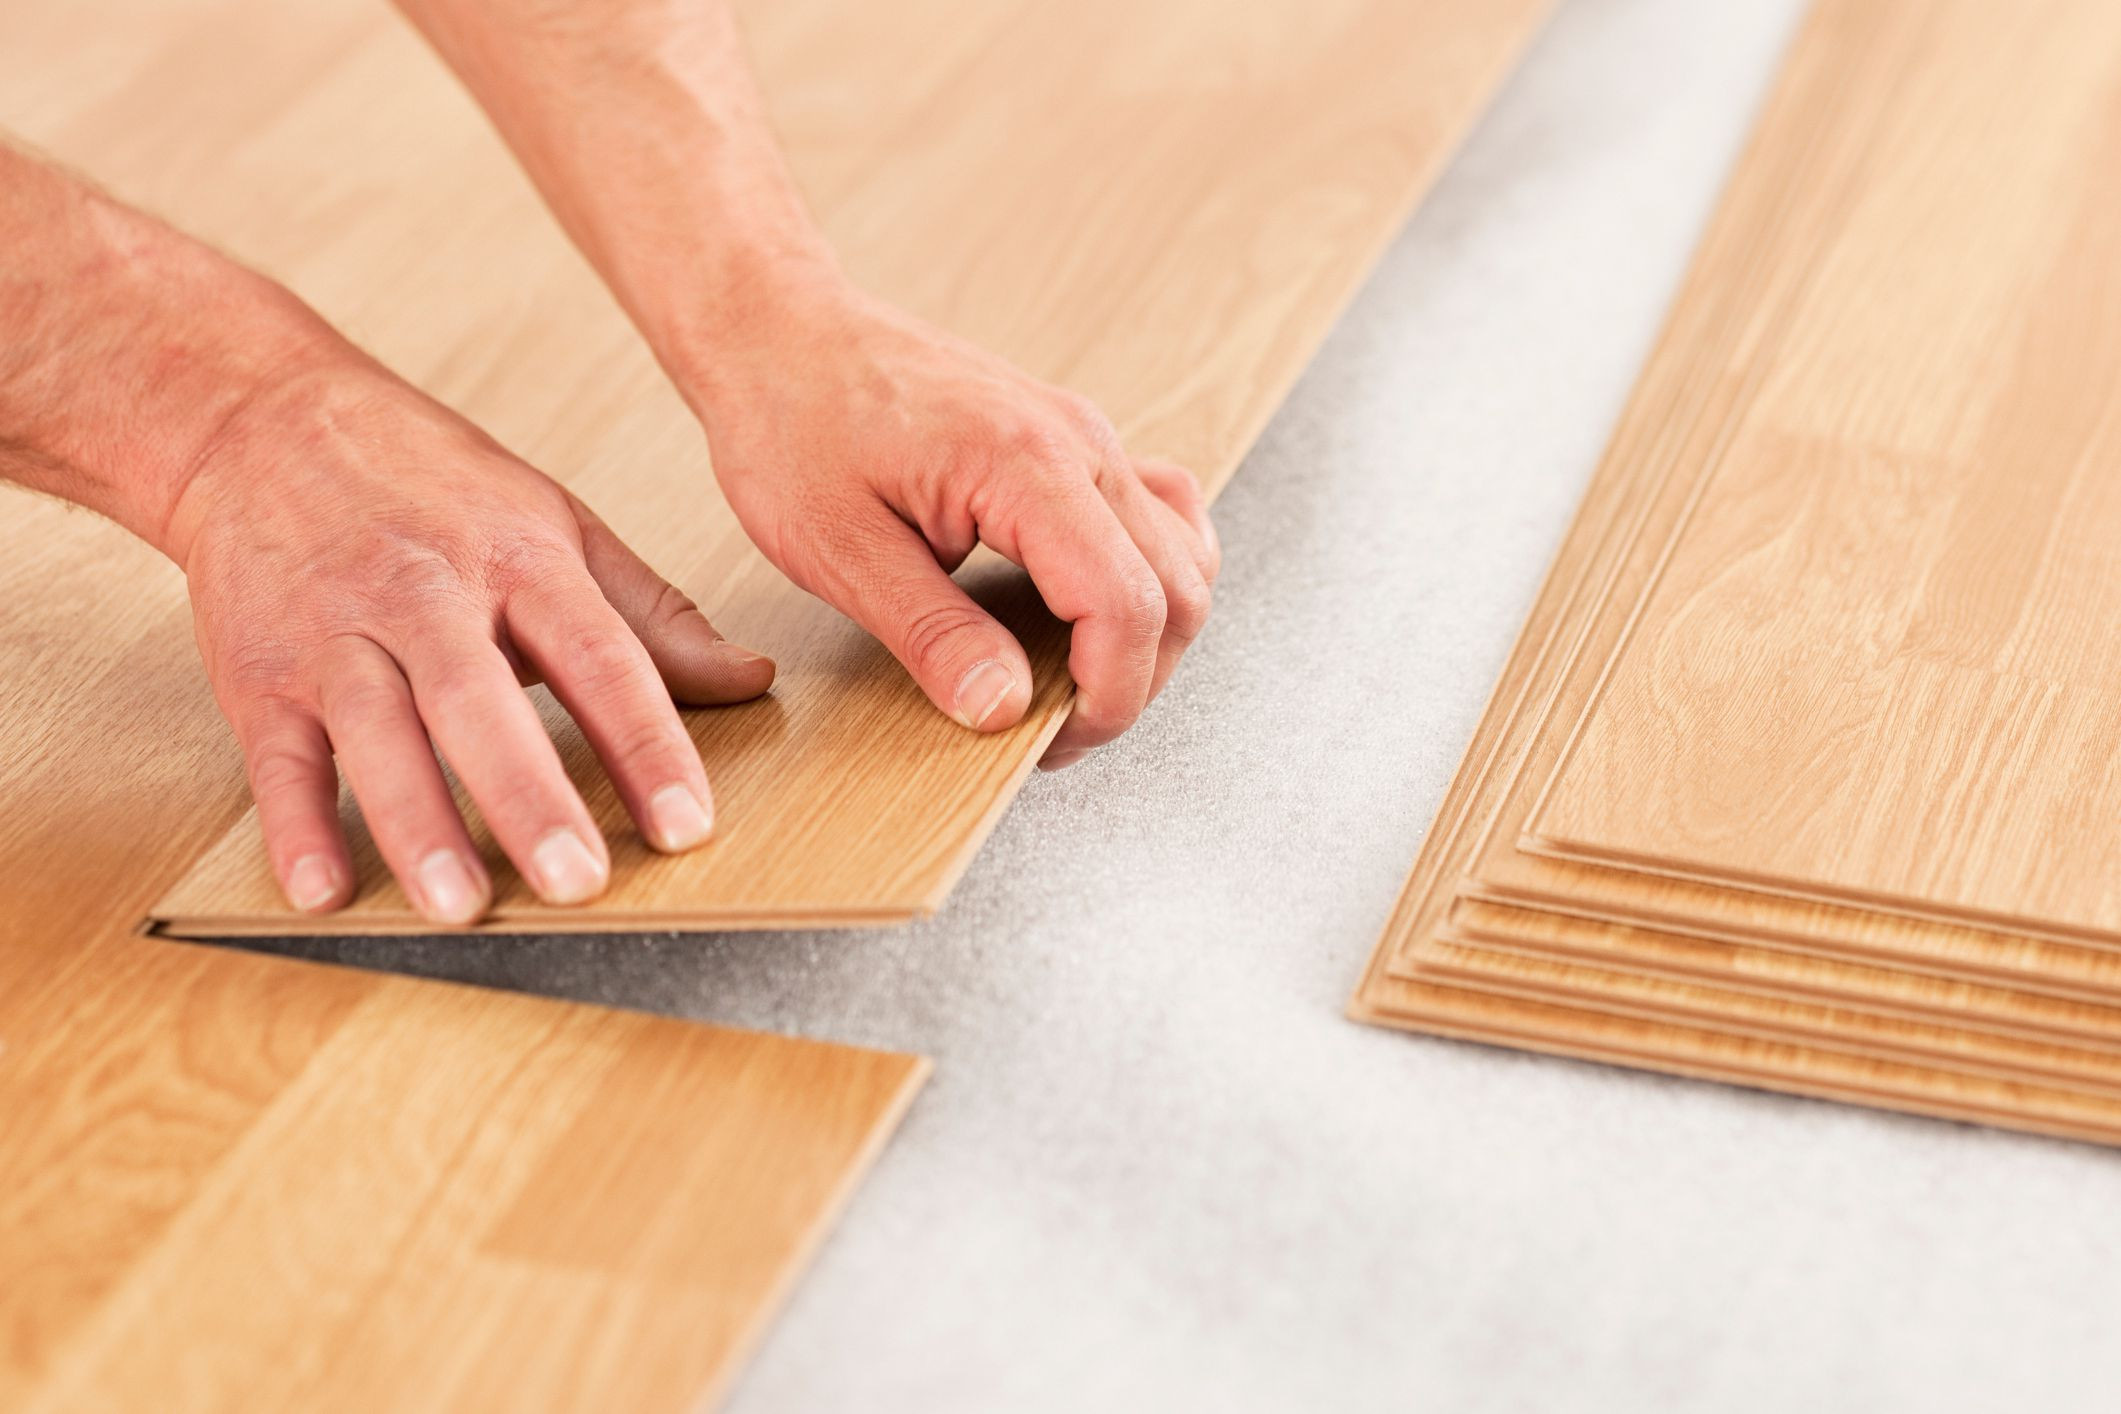 13 Amazing How to Install 3 4 Hardwood Flooring On Concrete 2024 free download how to install 3 4 hardwood flooring on concrete of laminate underlayment pros and cons regarding laminate floor install gettyimages 154961561 588816495f9b58bdb3da1a02